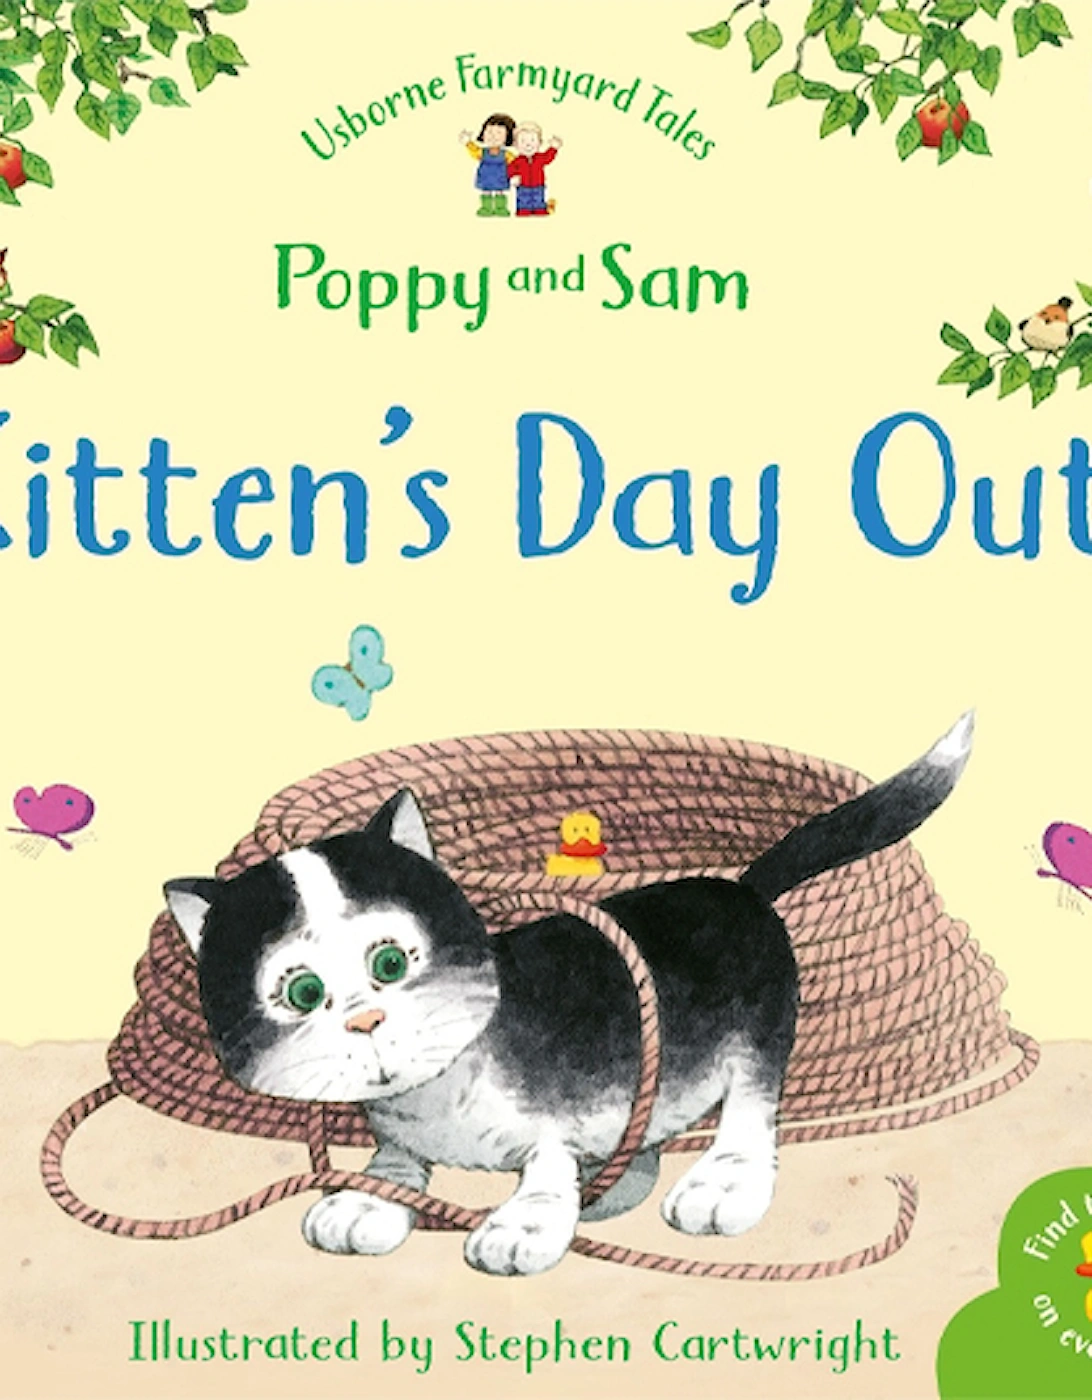 Farmyards Tales Poppy and Sam: Kitten's Day Out, 2 of 1